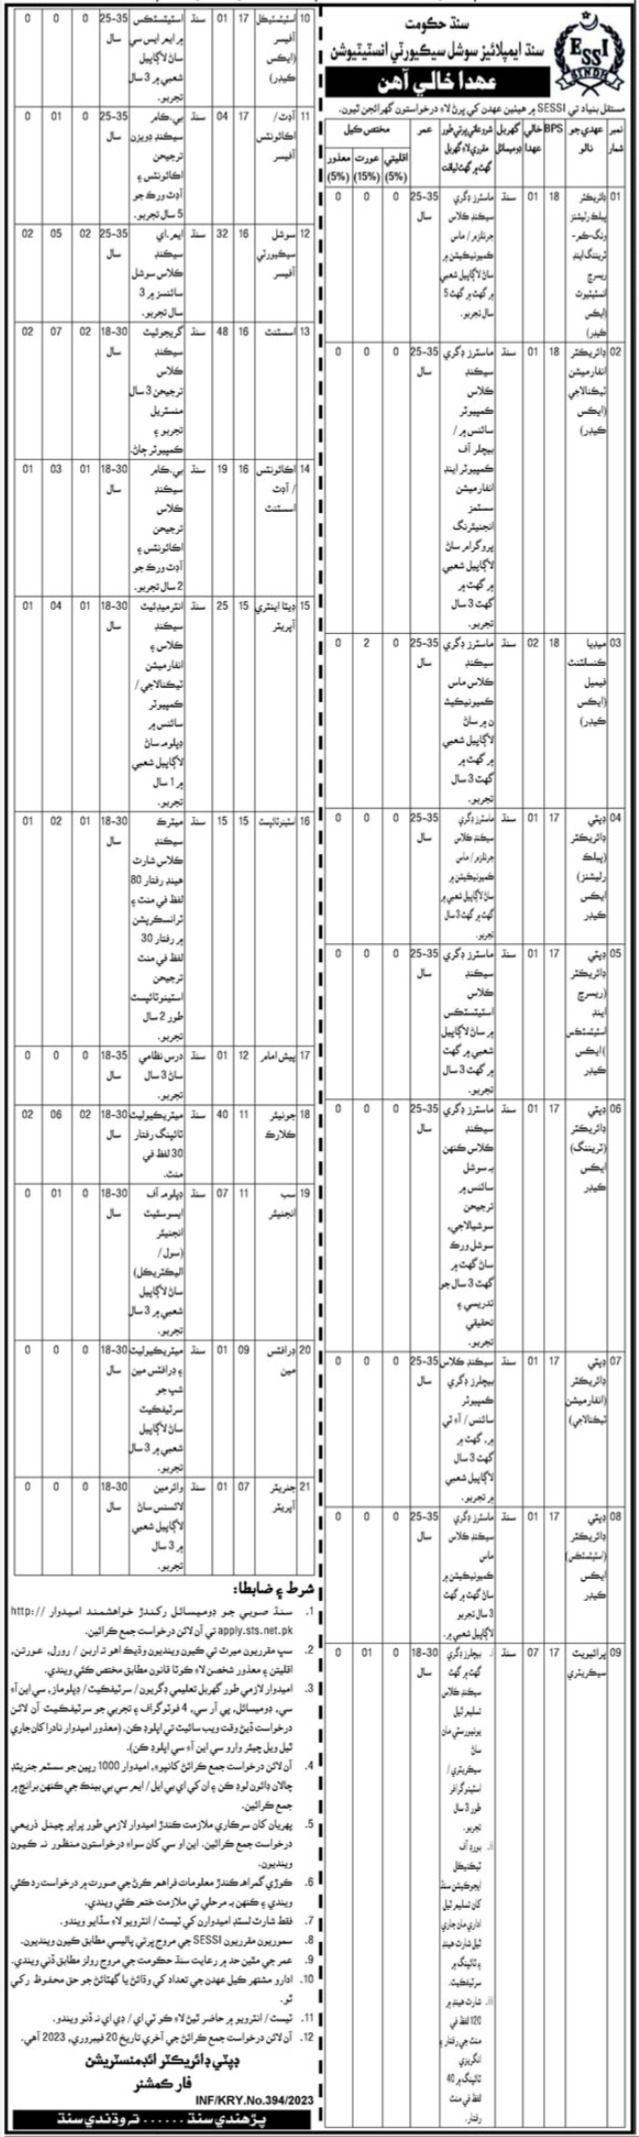 Sindh Employees Social Security Institution Government Jobs